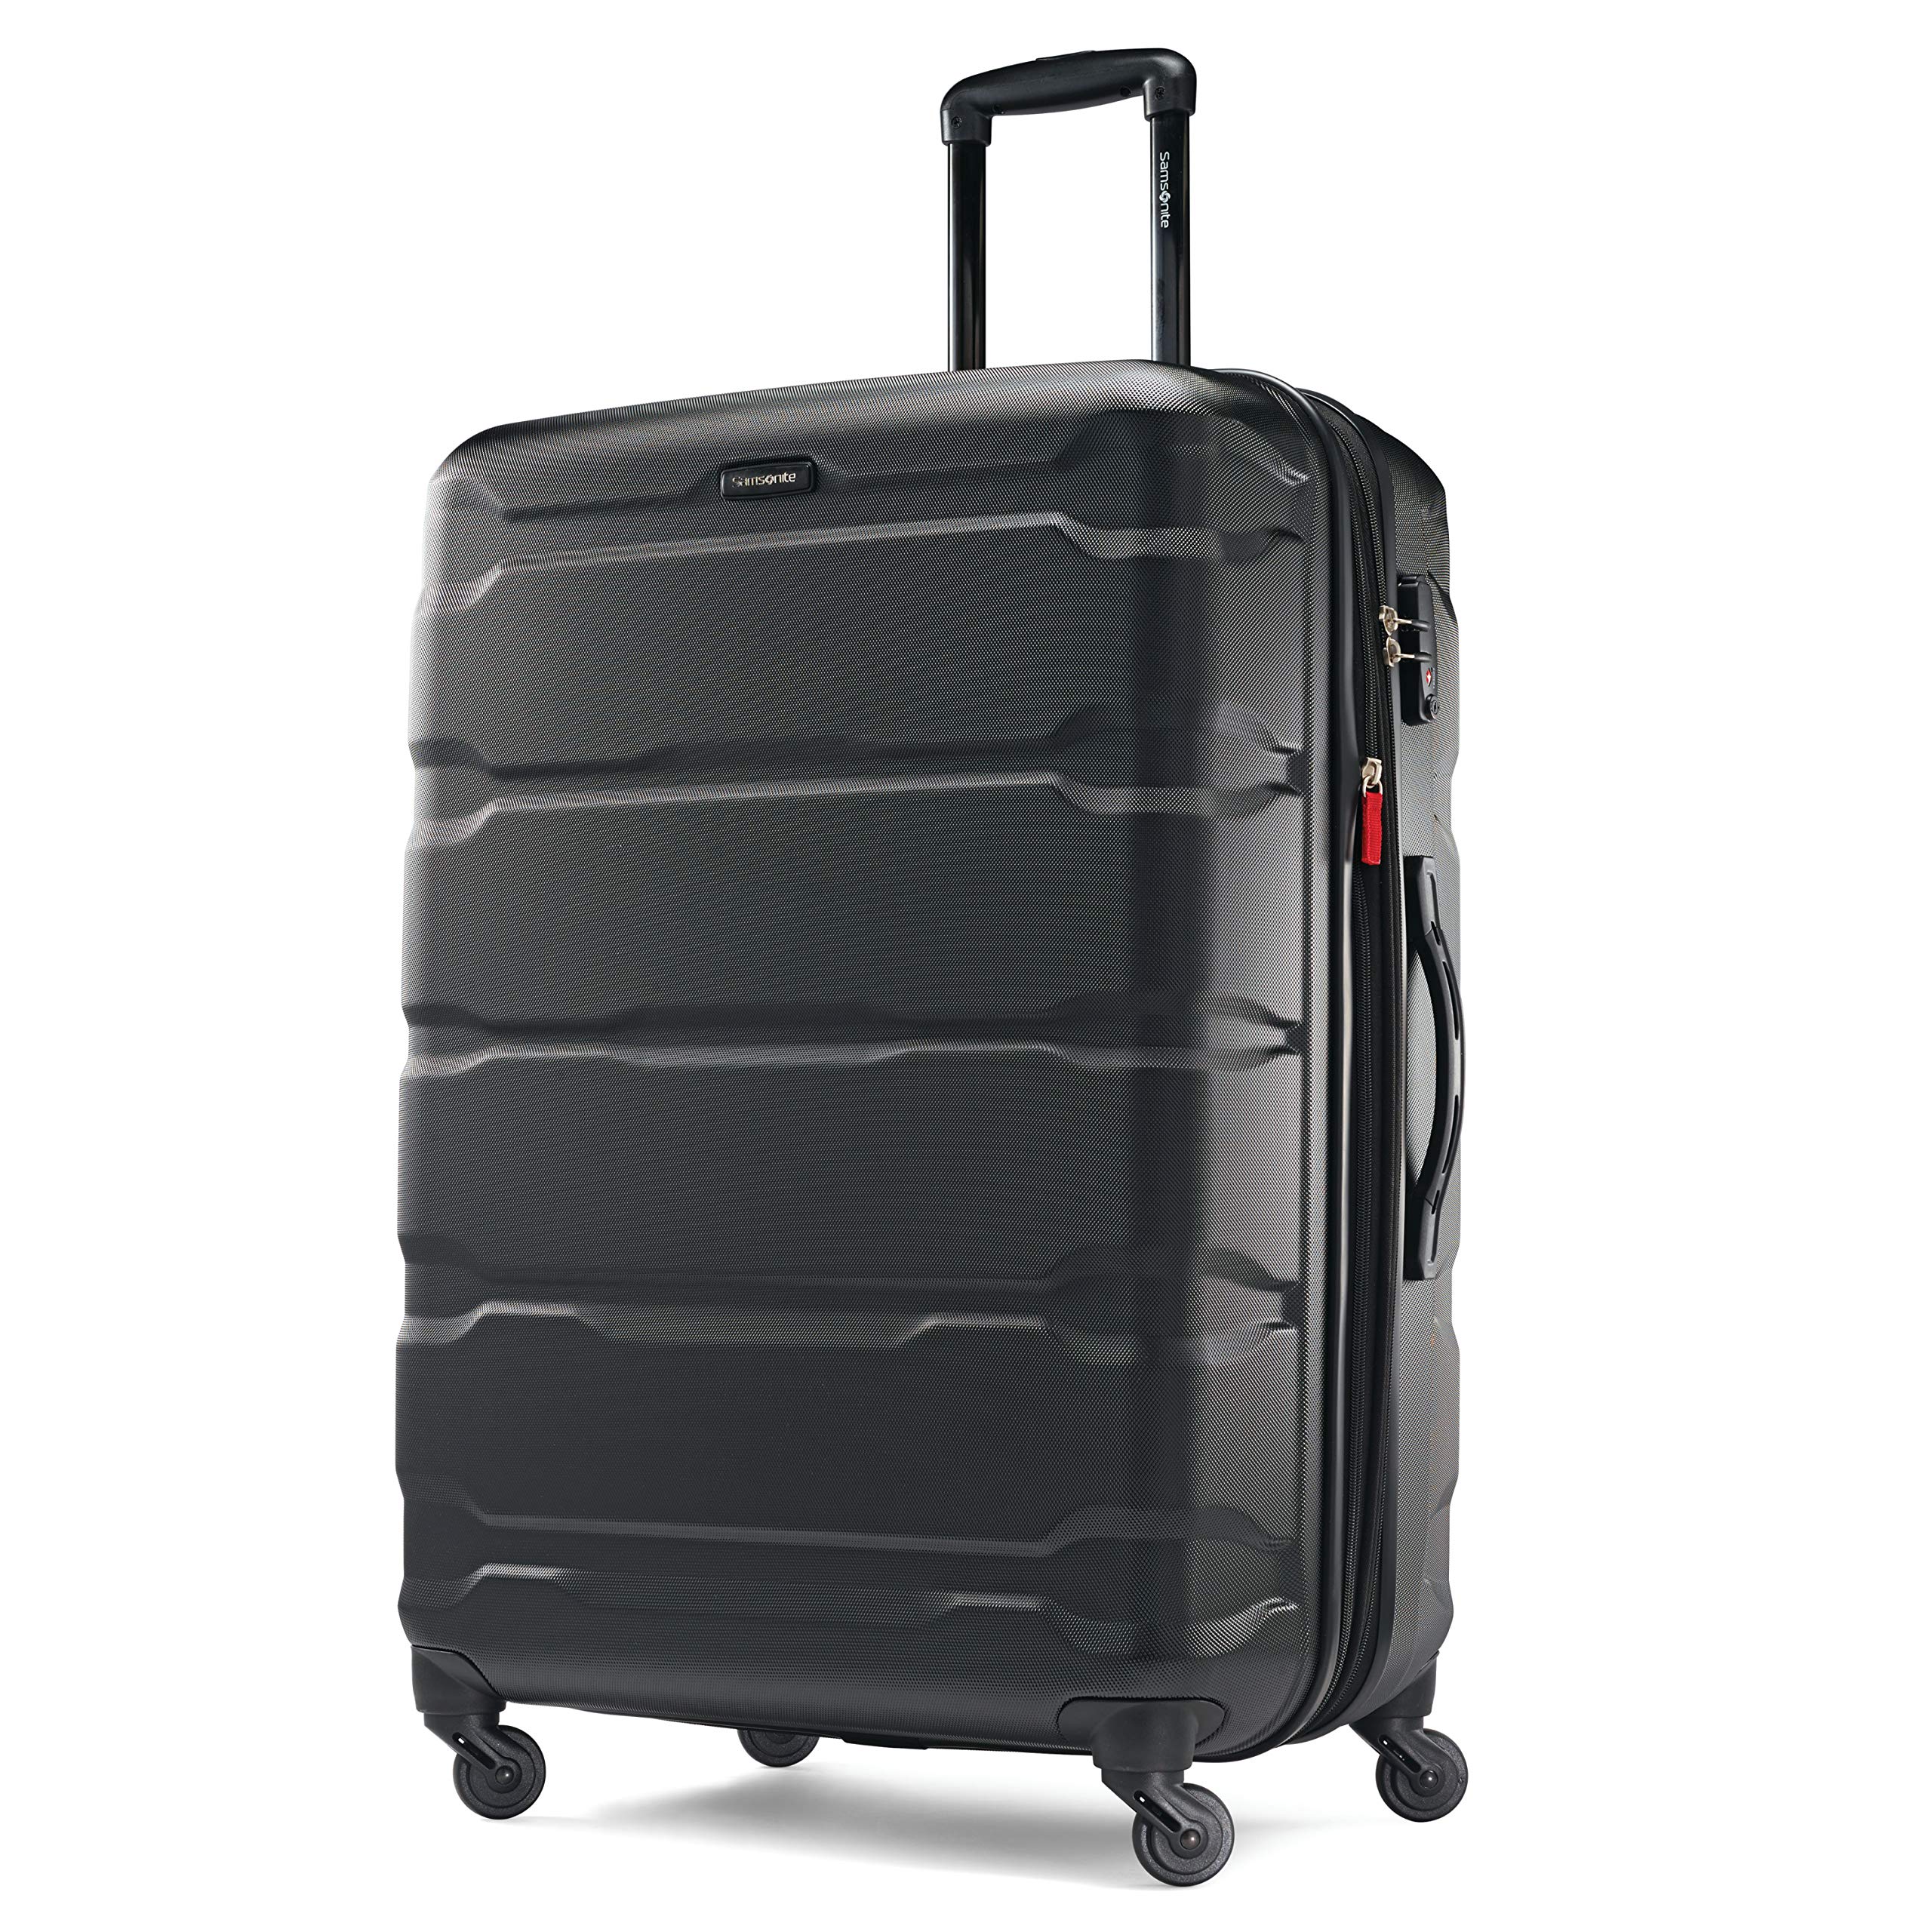 How to Set the Lock Code on a Samsonite Omni PC Suitcase